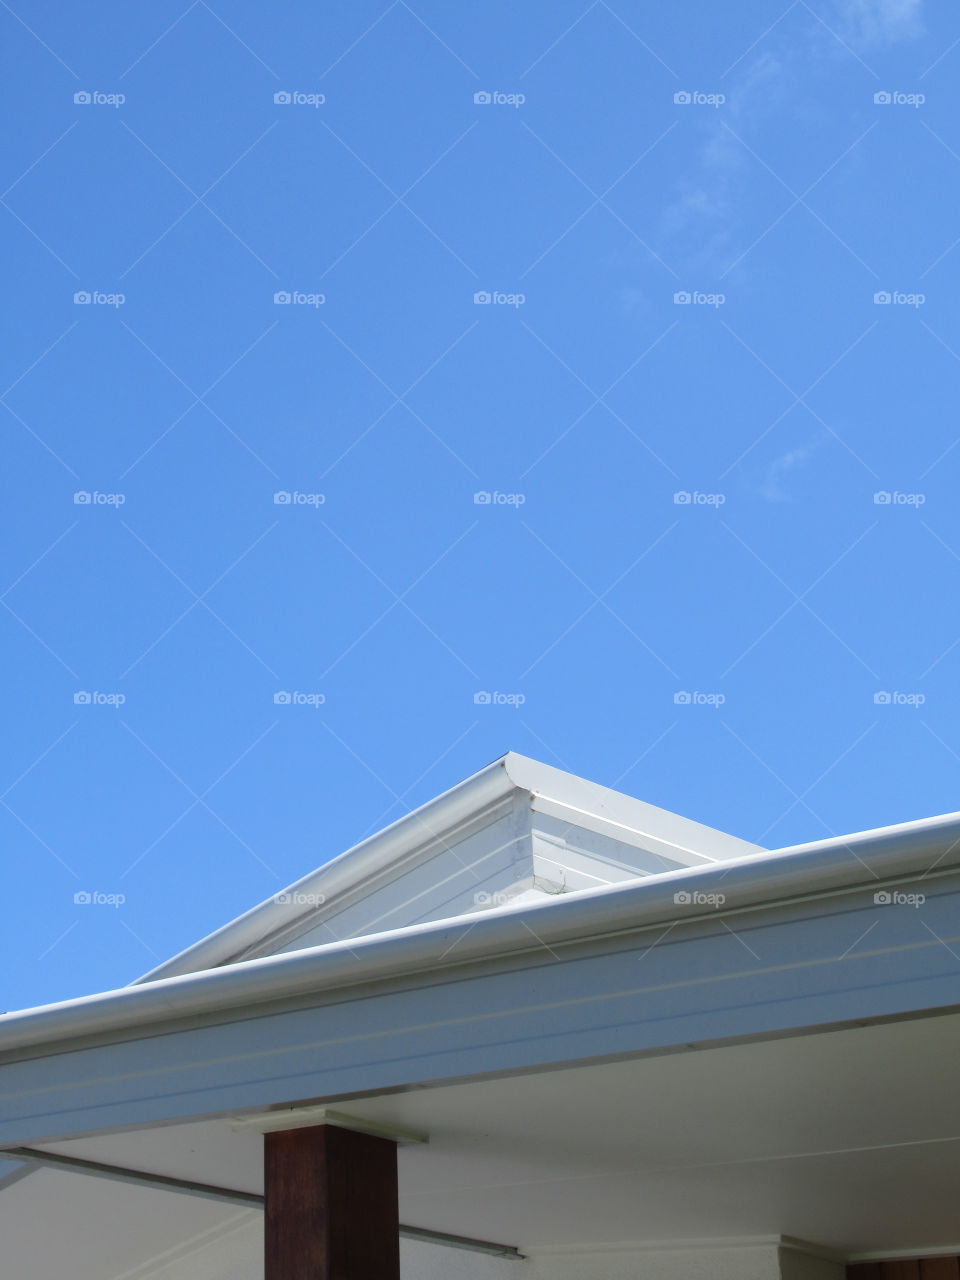 A wonderful depiction of the Noosa sky, contrasted against a perfectly angled house to give a light on photo